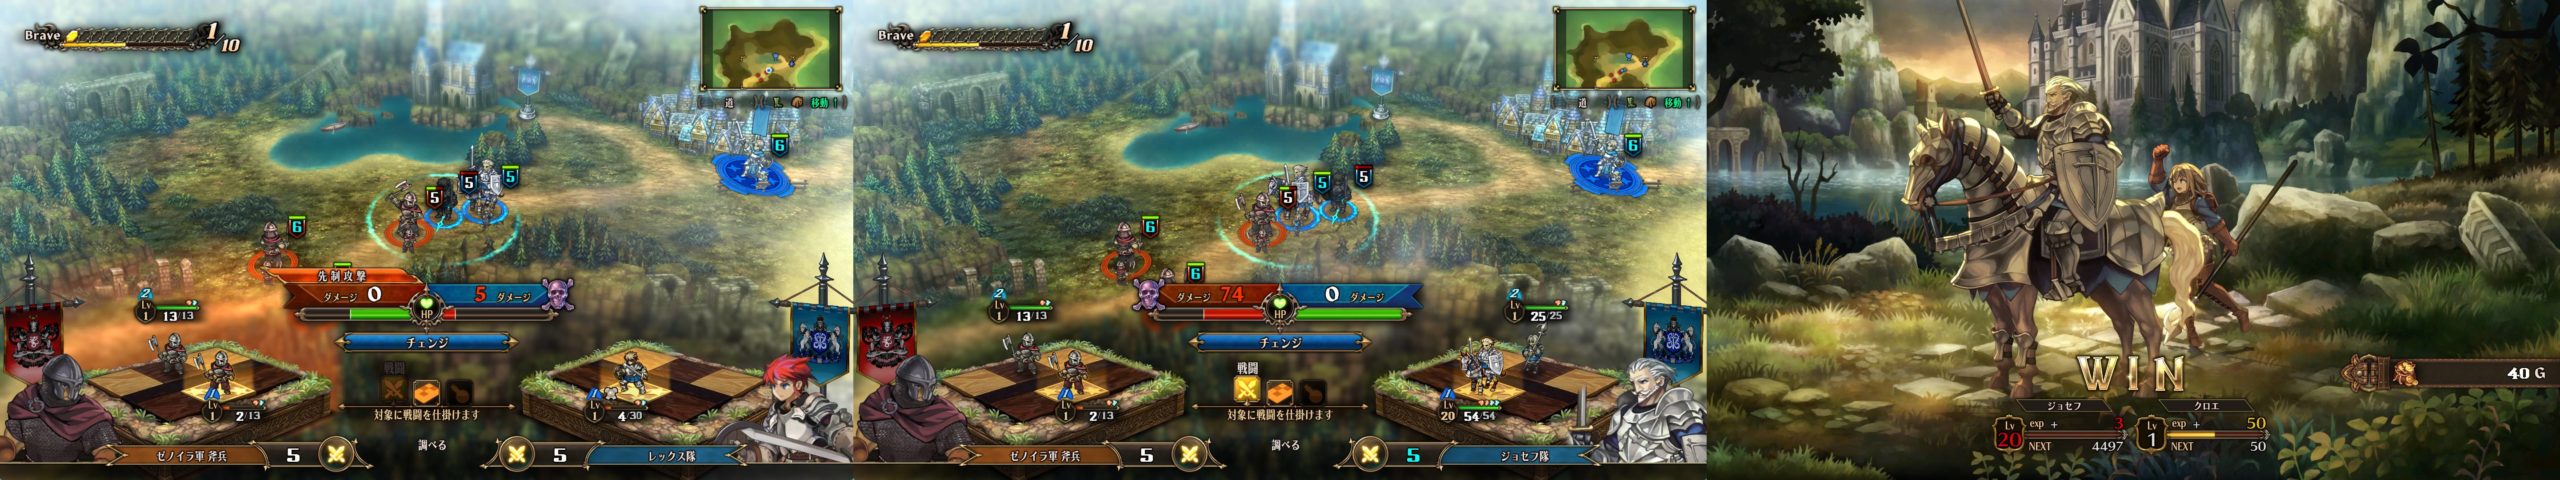 Unicorn Overlord Unveils New Battle Stages and Training Tips in Latest Video Update Swapping Positions